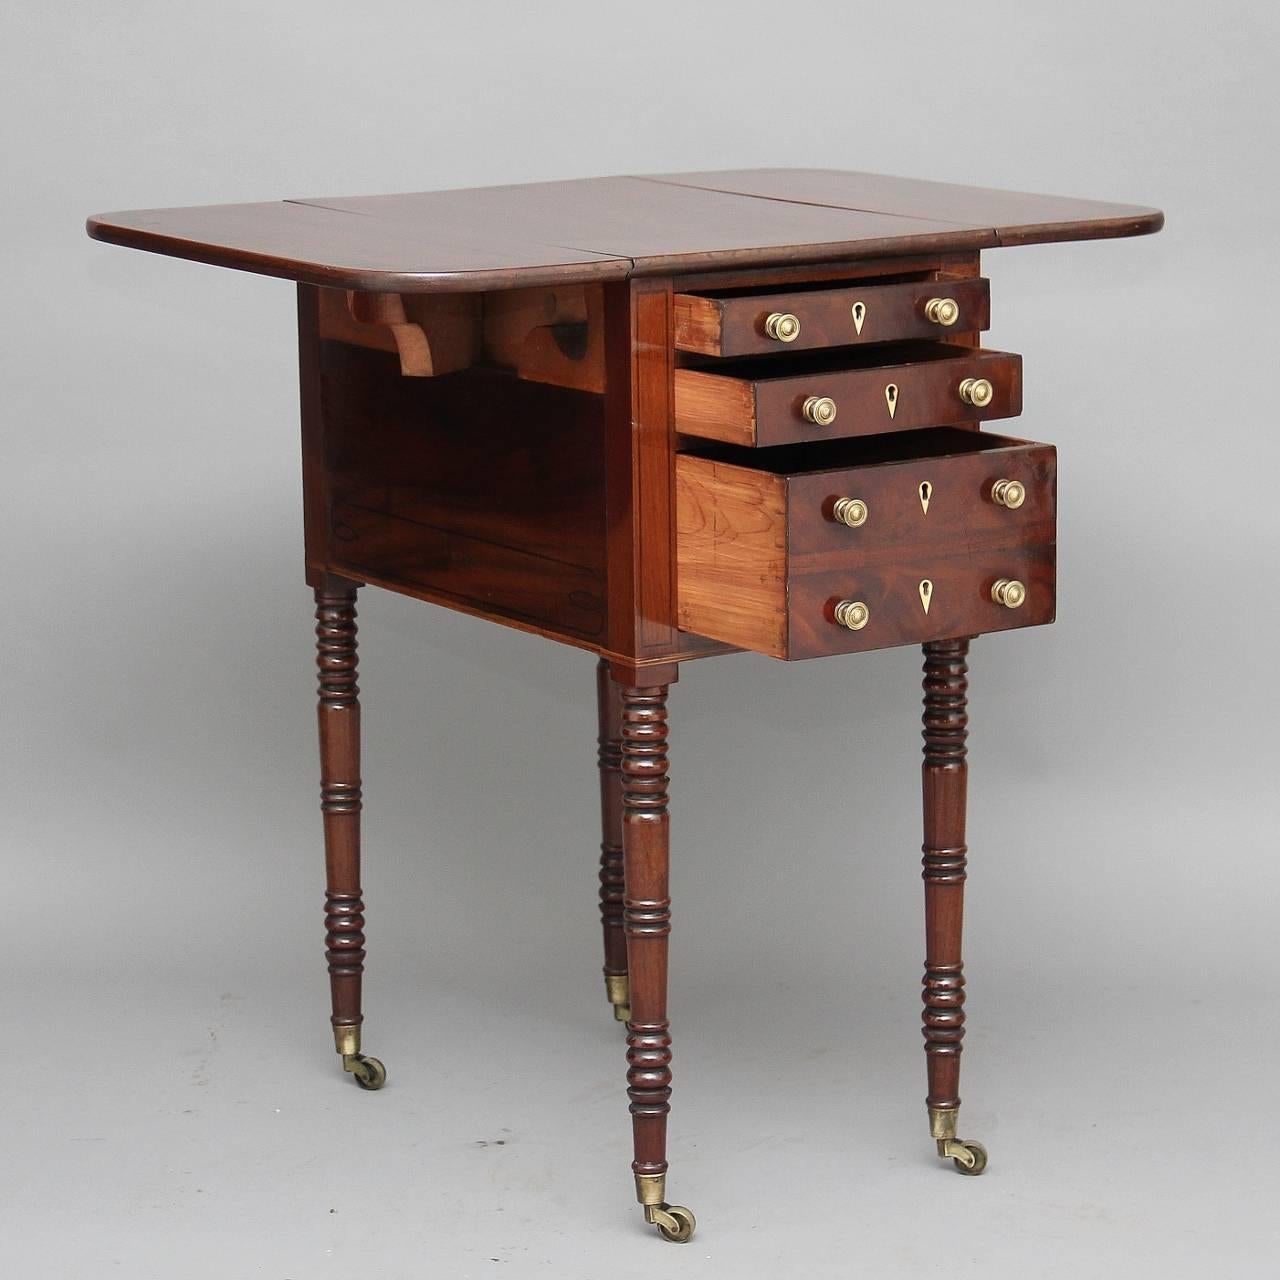 19th century mahogany drop-leaf or side table with a rosewood crossbanded top which extends to 28″ (73cms) with three cedar lined drawers below with original turned knobs, the reverse of the table is exactly the same just with dummy drawers, the